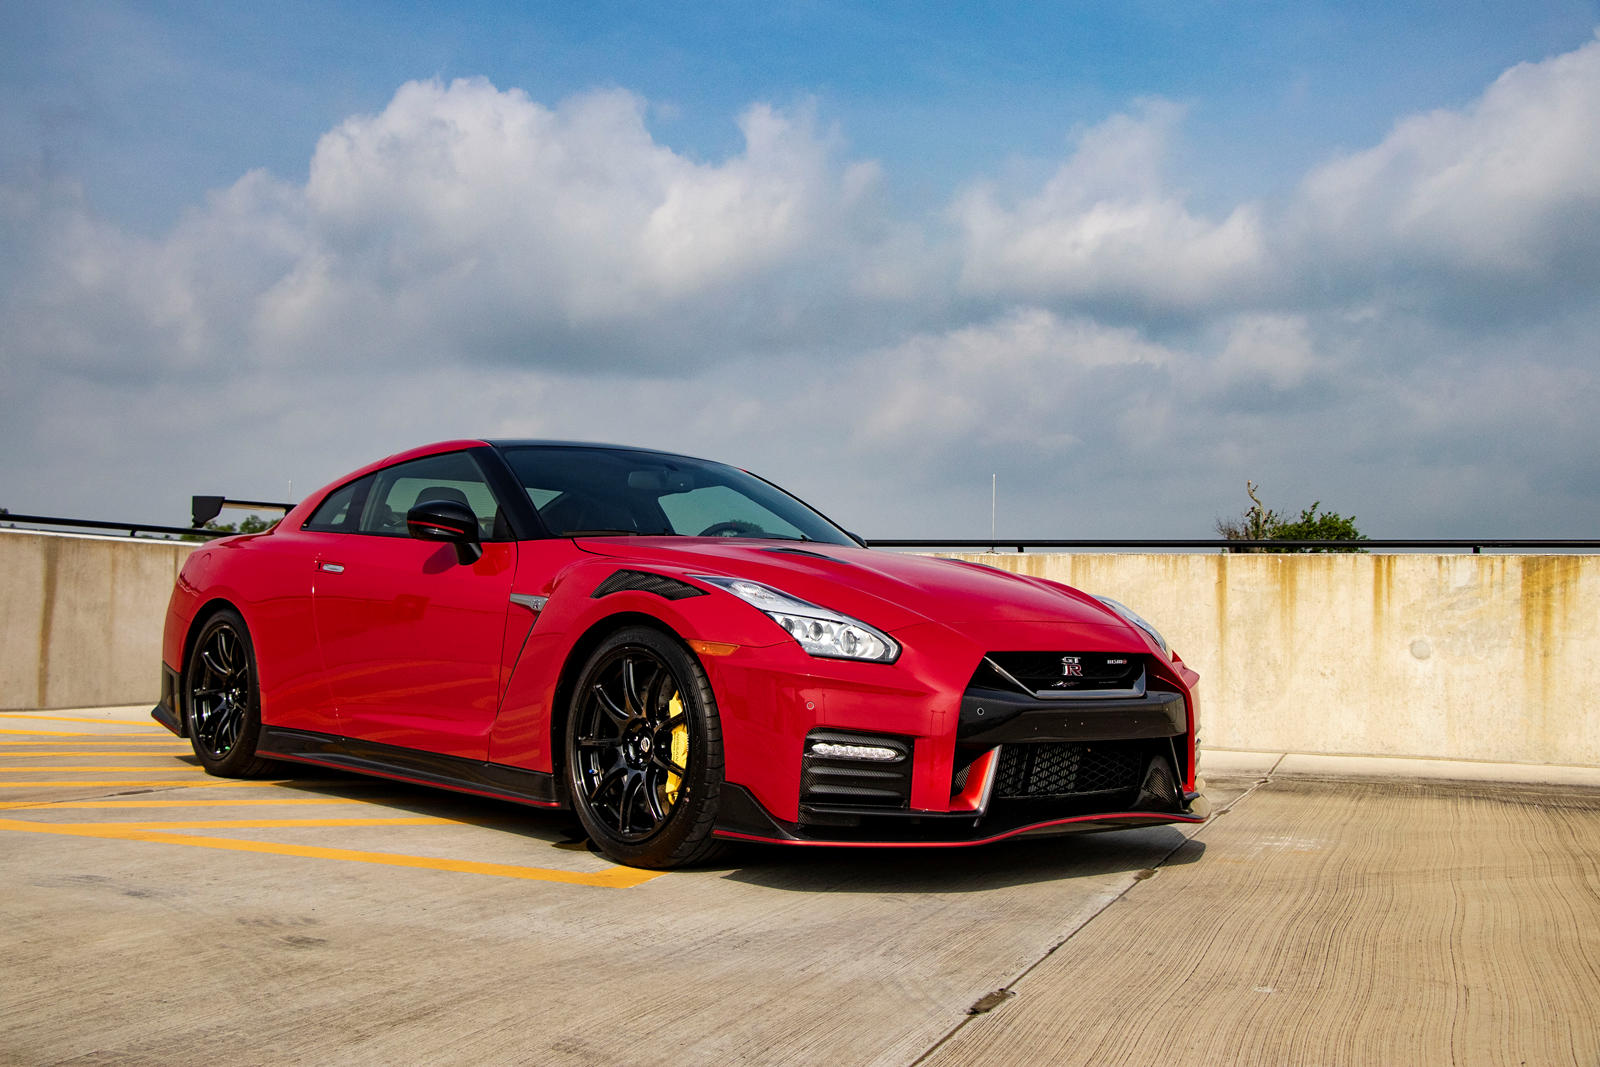 2020 Nissan GT-R Nismo: Review, Trims, Specs, Price, New Interior